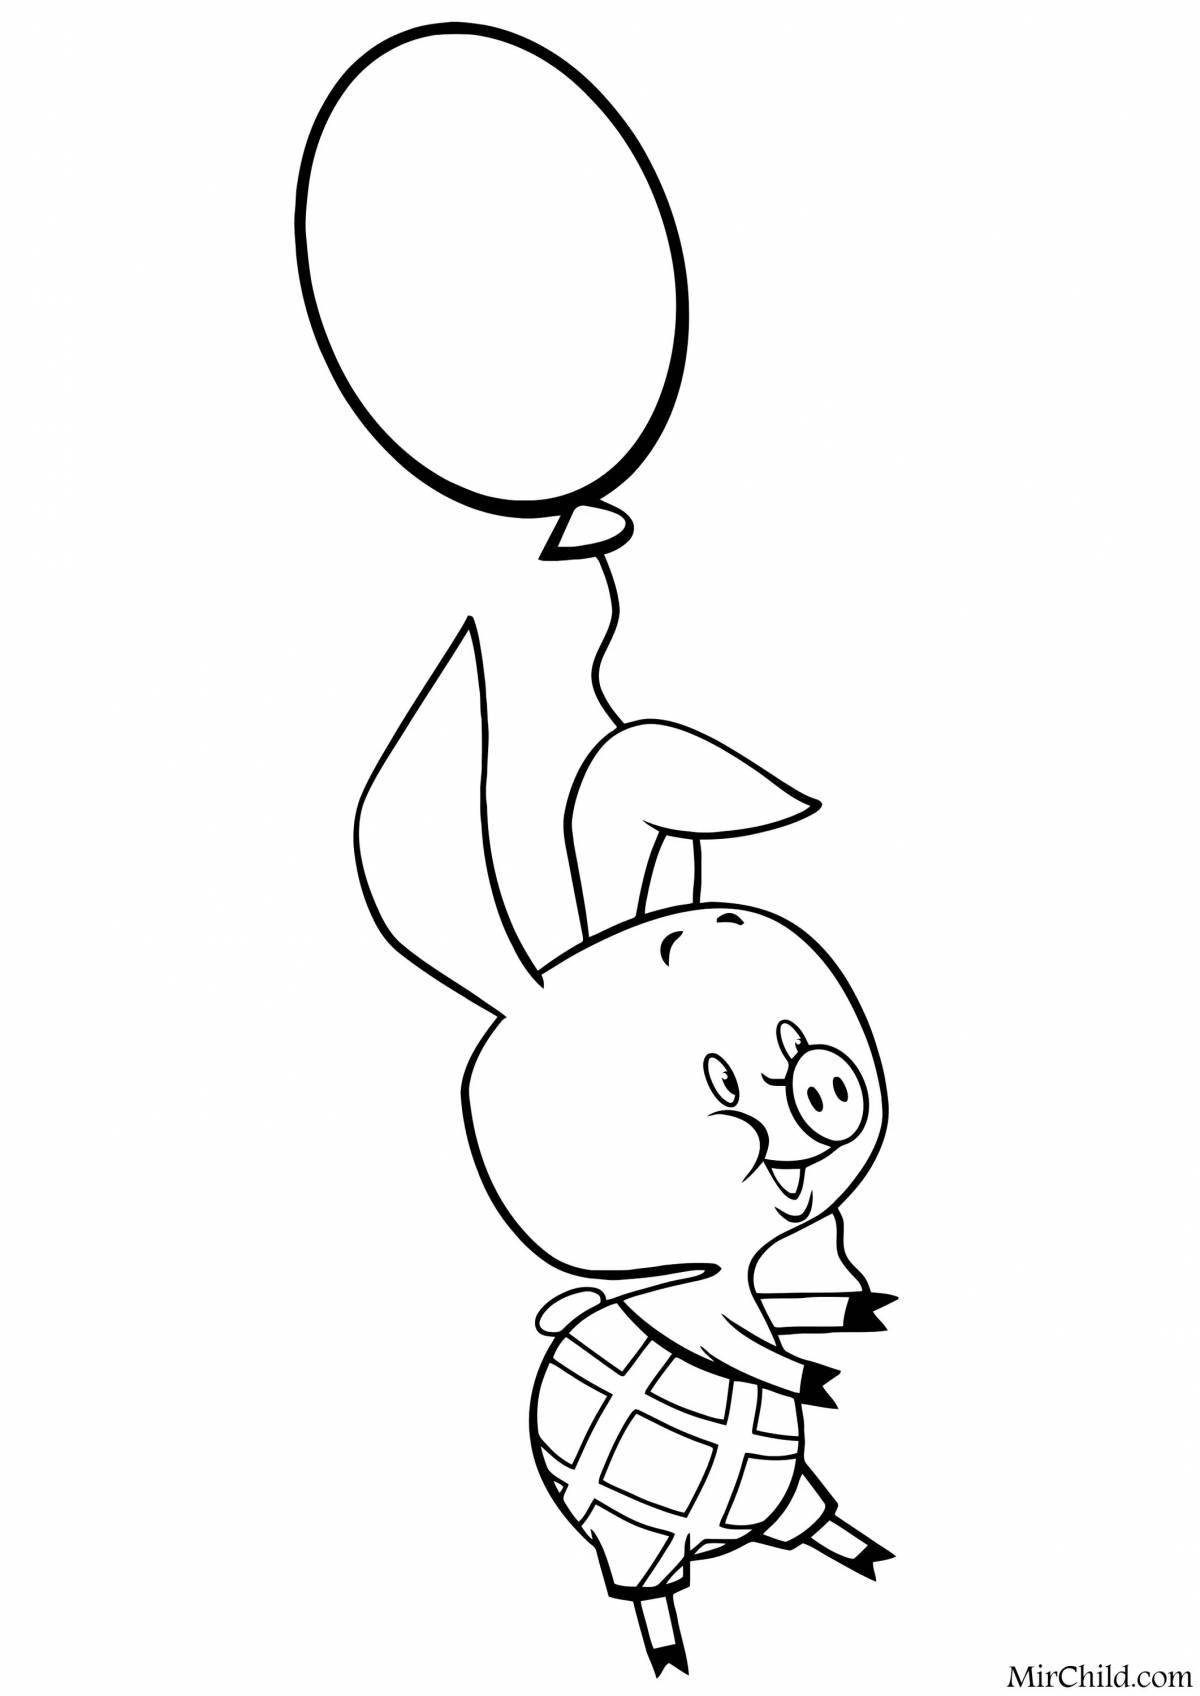 Winnie the pooh with balloon #7